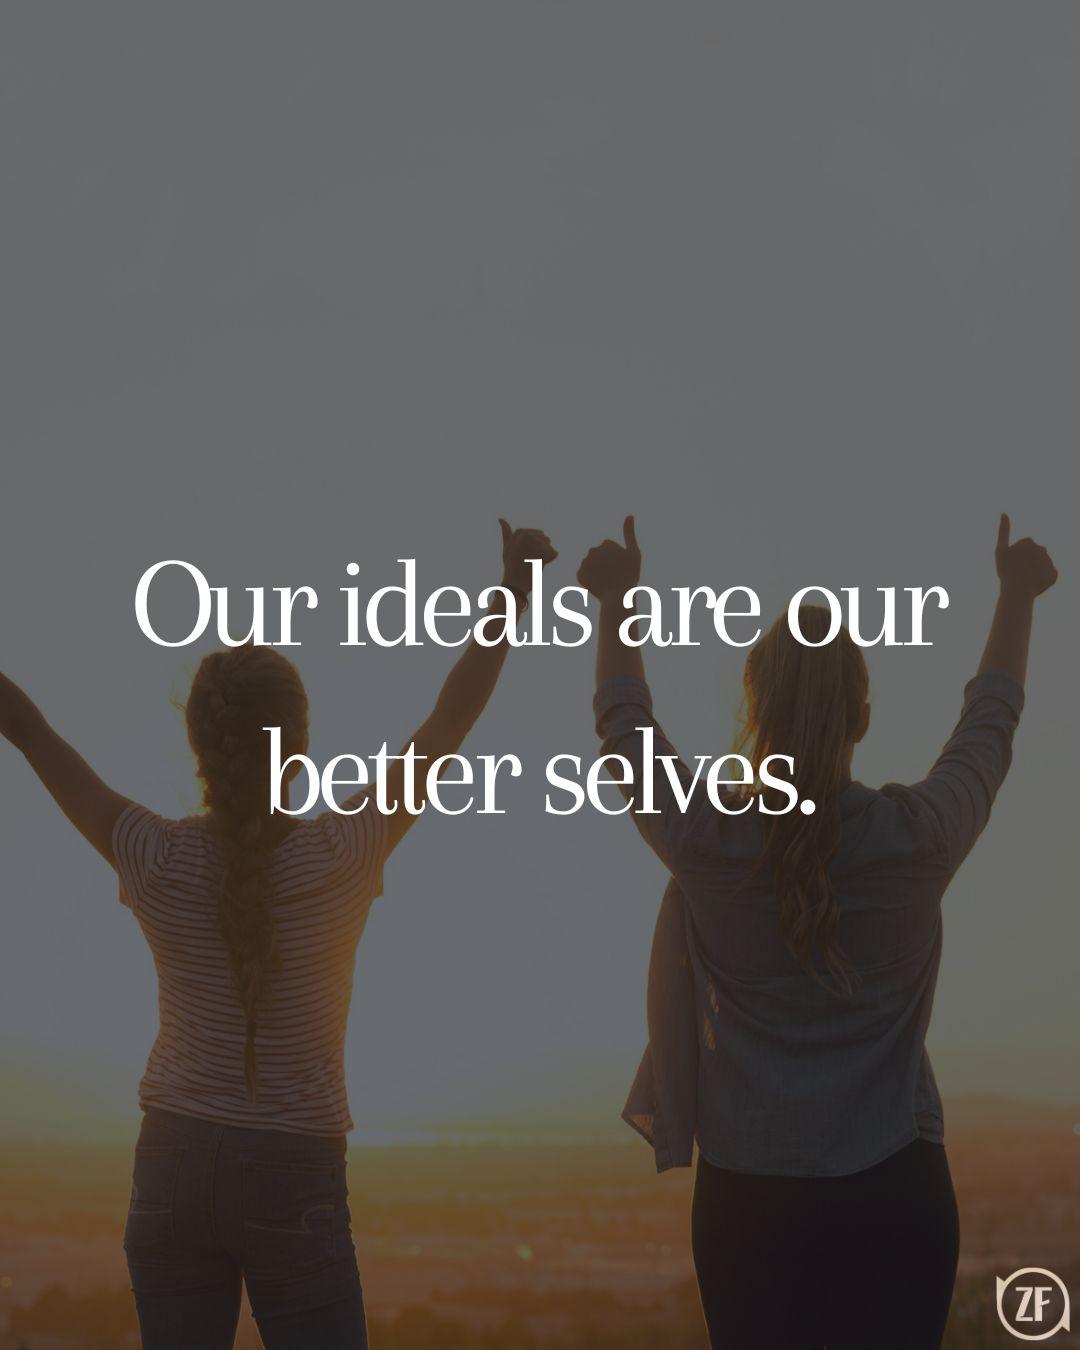 Our ideals are our better selves.